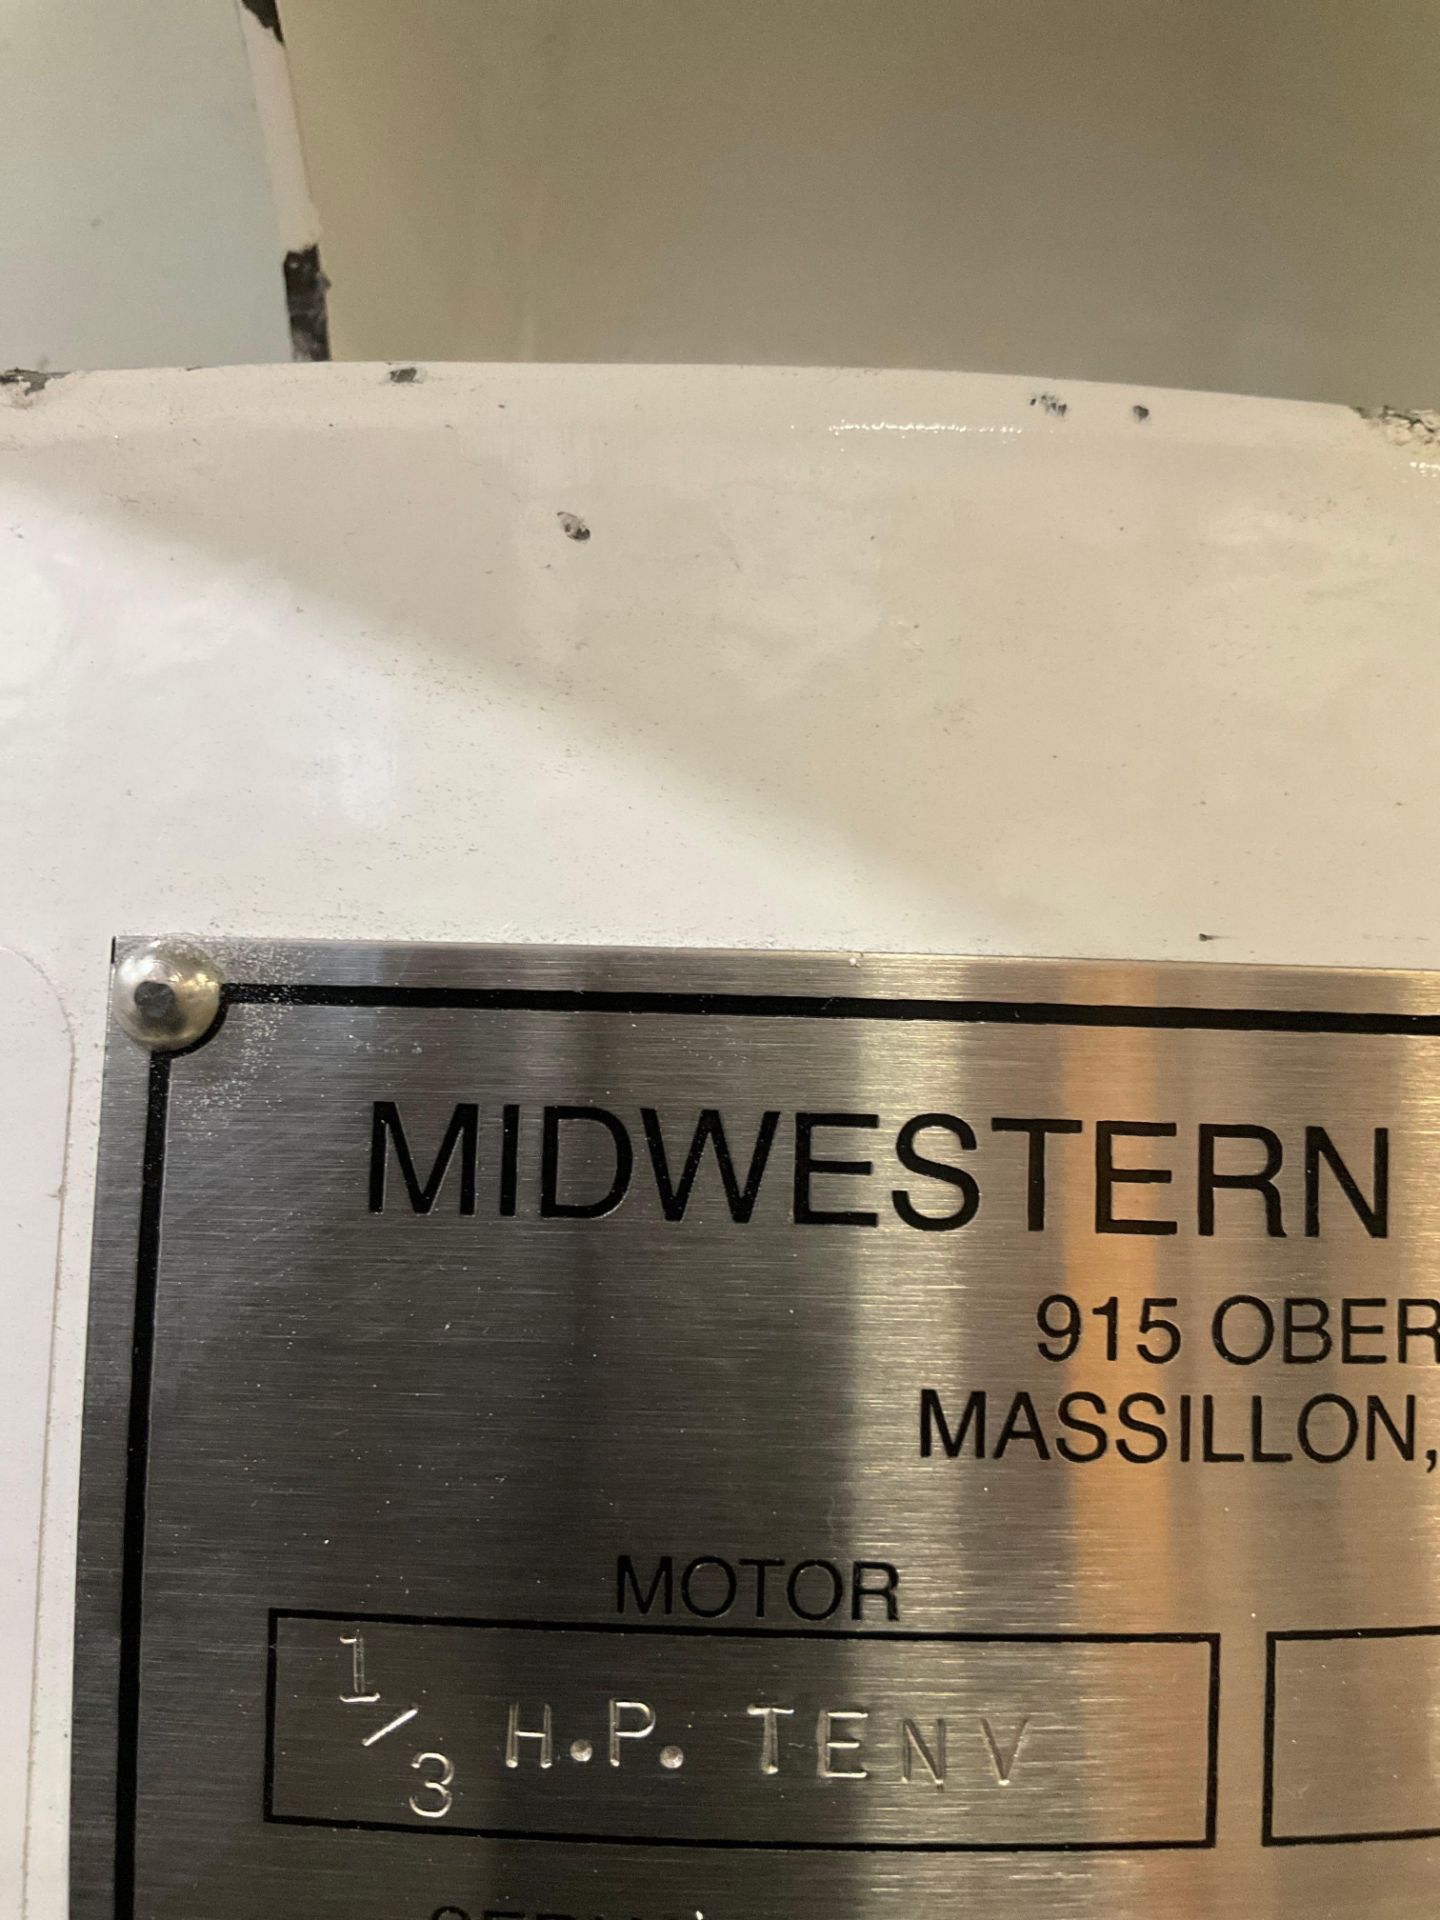 MIDWESTERN INDUSTRIES F1-24 SIFTER WITH MR24S4-4 MOTOR - Image 11 of 11